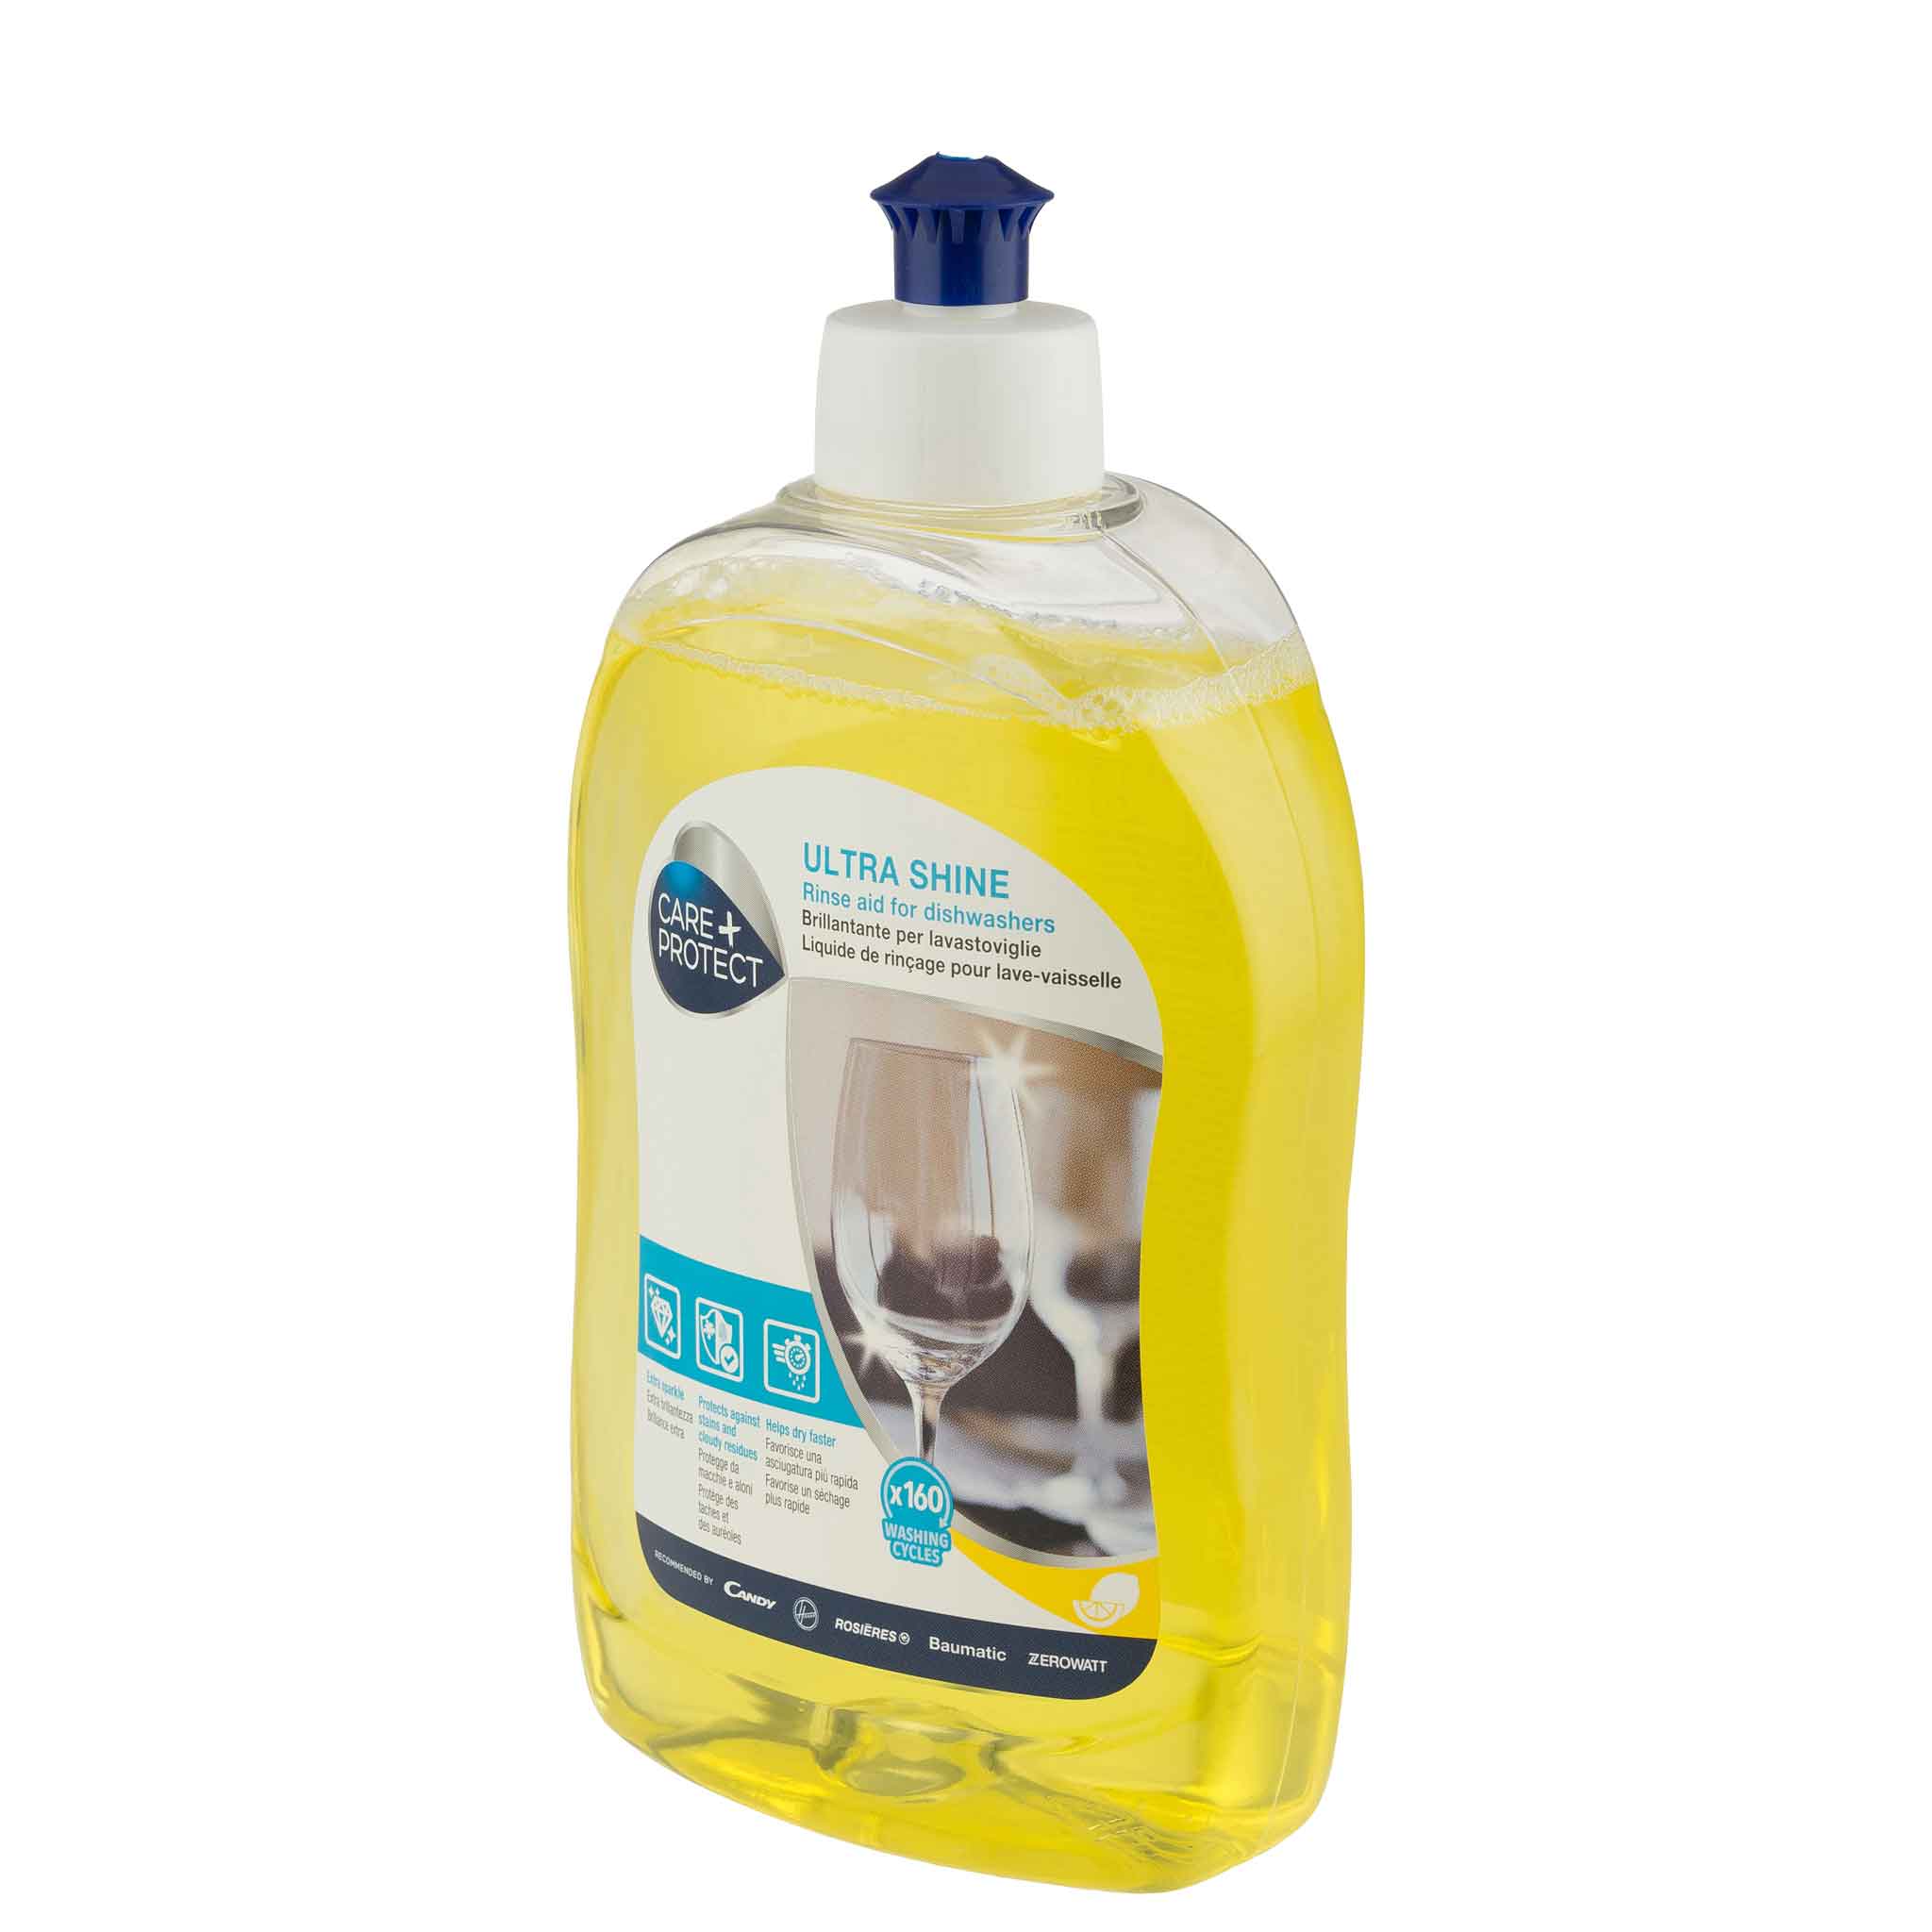 Rinse Aid for Dishwashers